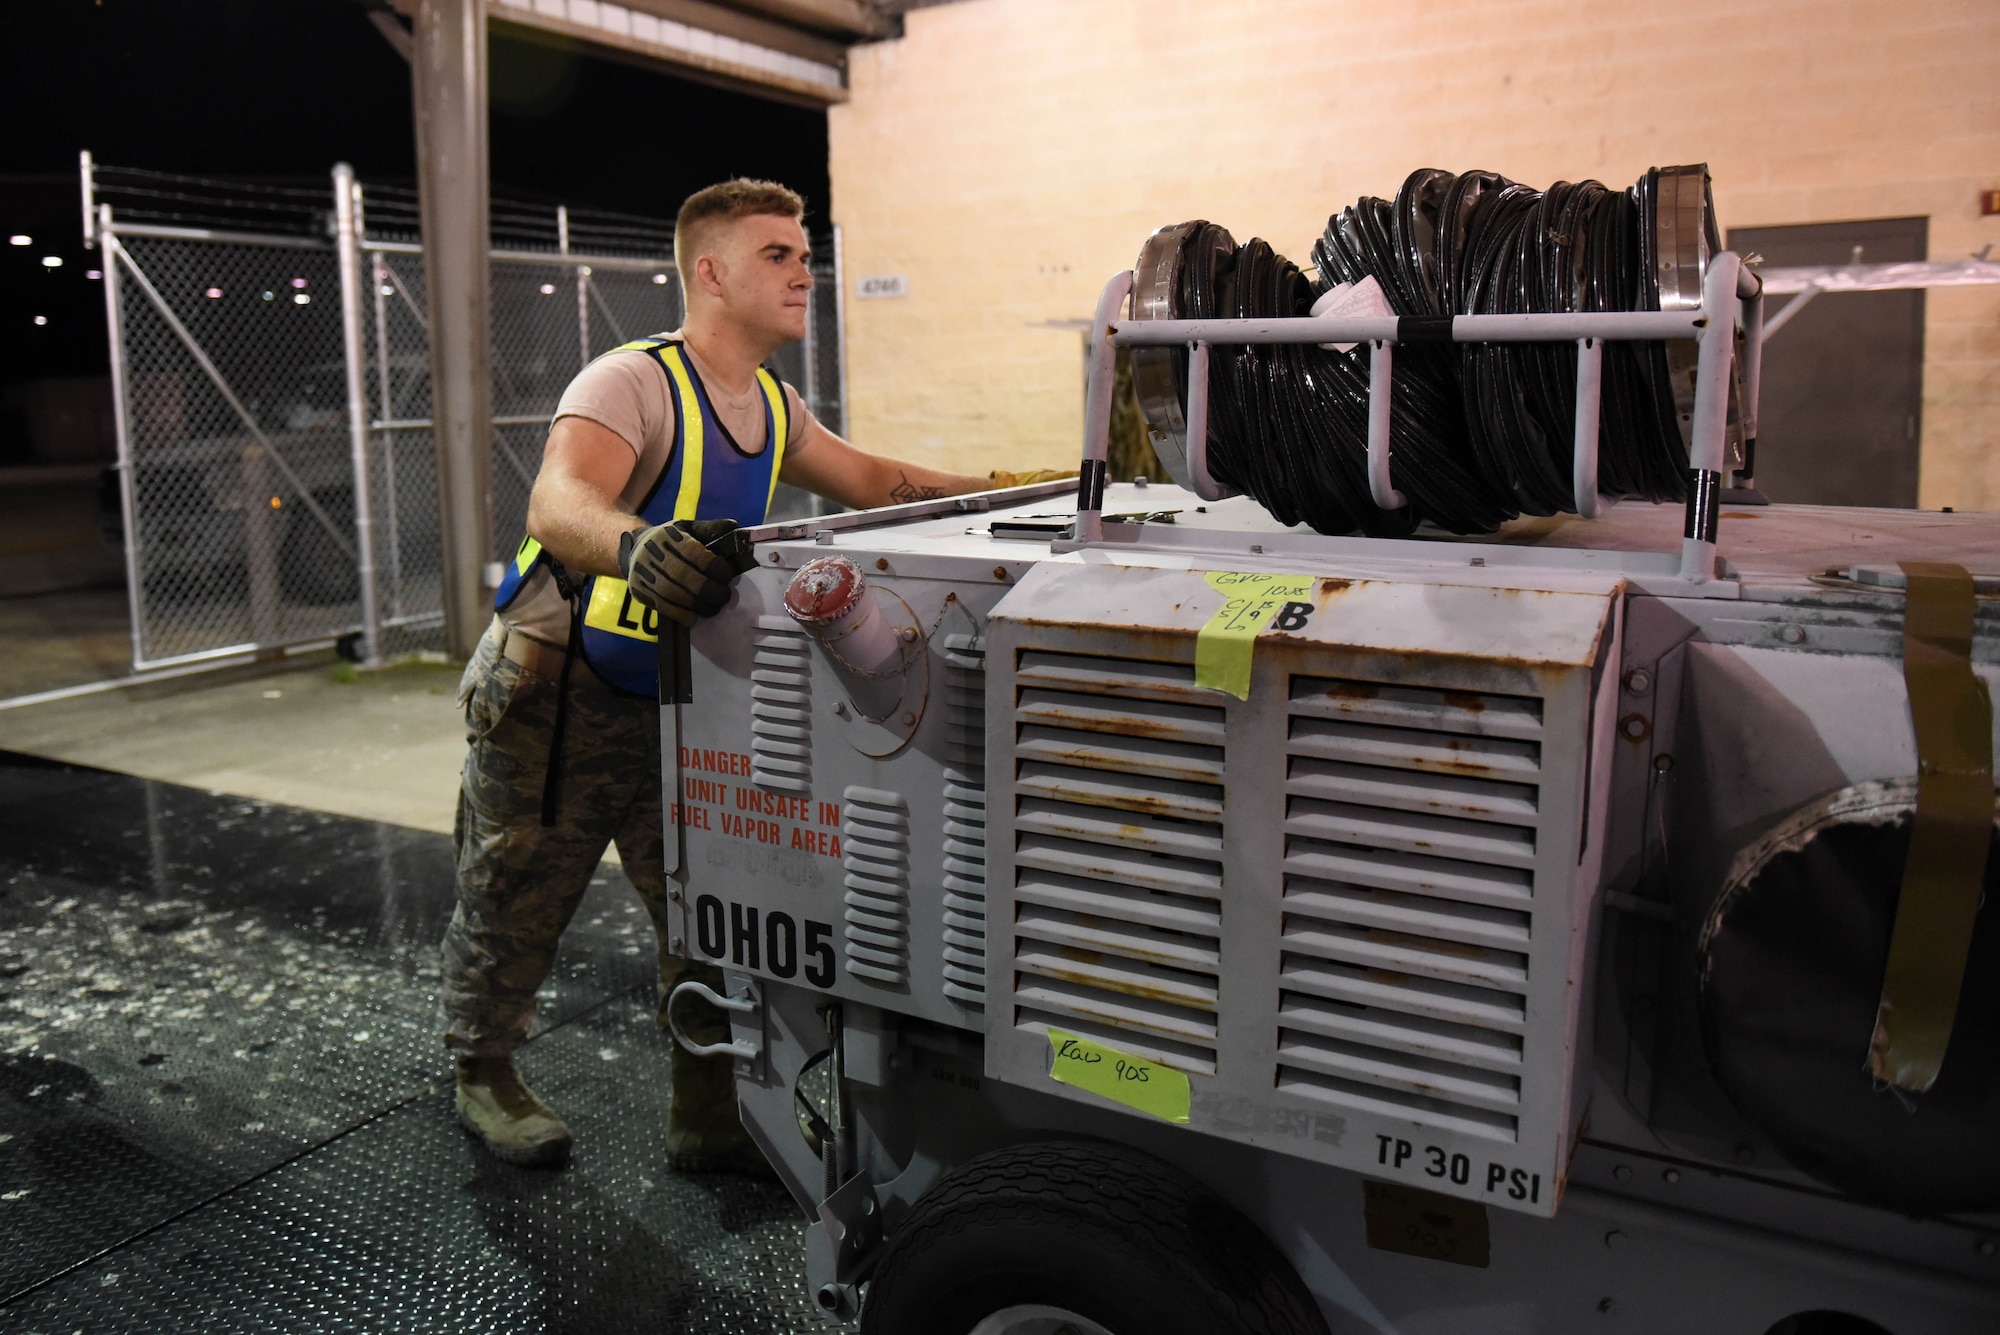 Staff Sgt. Branden Lashhorn, 4th Civil Engineer Squadron structural technician, removes a heating cart from a weighing scale during exercise Thunderdome 17-02, July 20, 2017, at Seymour Johnson Air Force Base, North Carolina. During the exercise, members of the 4th Fighter Wing conducted simulated cargo transport. (U.S. Air Force photo by Airman 1st Class Victoria Boyton)